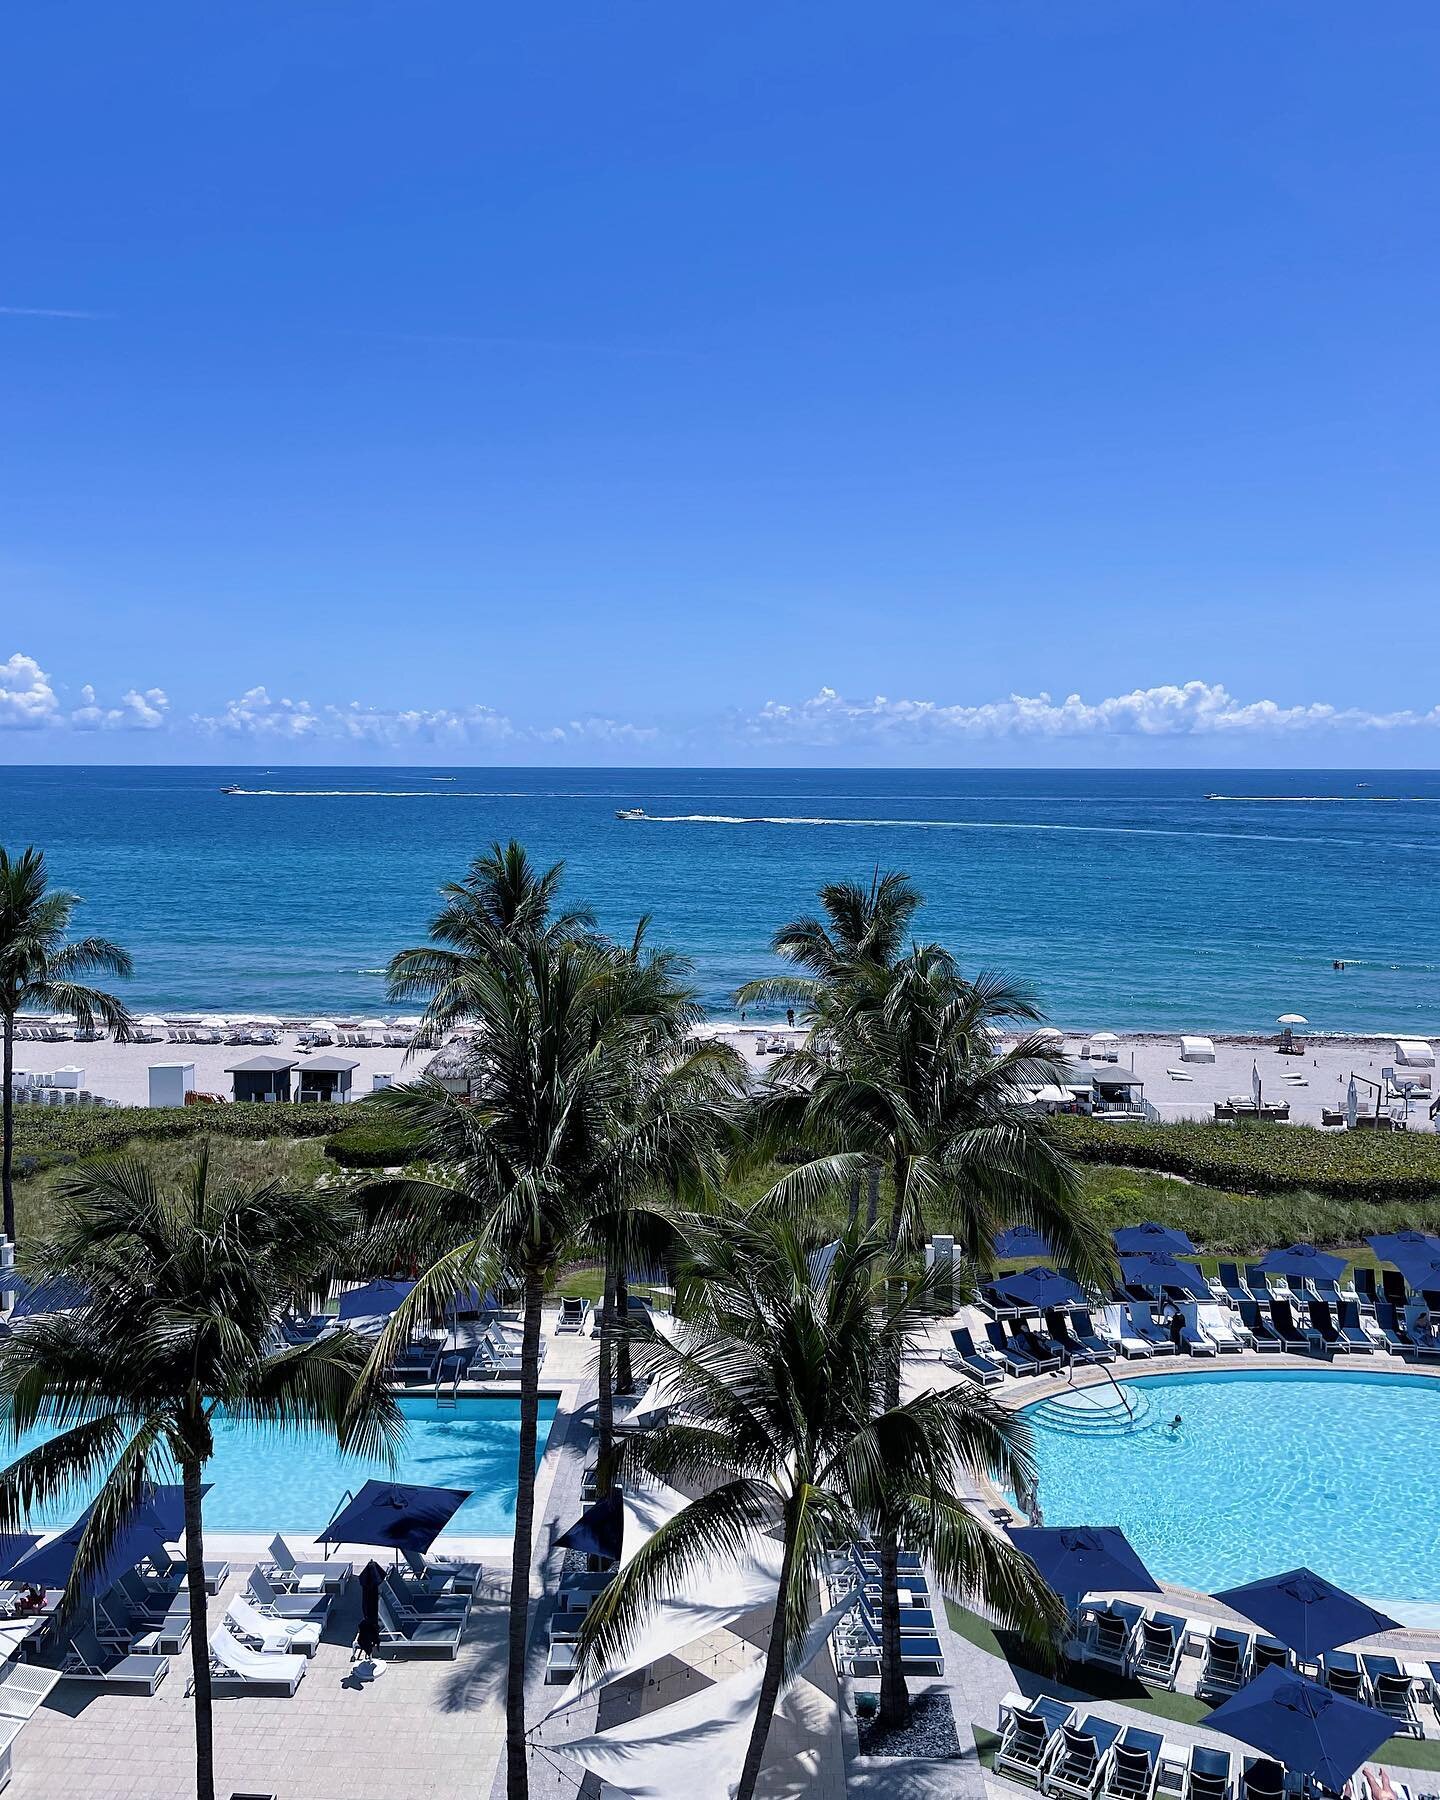 The Boca Raton is Florida&rsquo;s ultimate playground with 5 unique hotel options on-property, the question I get asked most often is - Which building should I stay in? 

Save this post to learn about the differences between each building so we can d